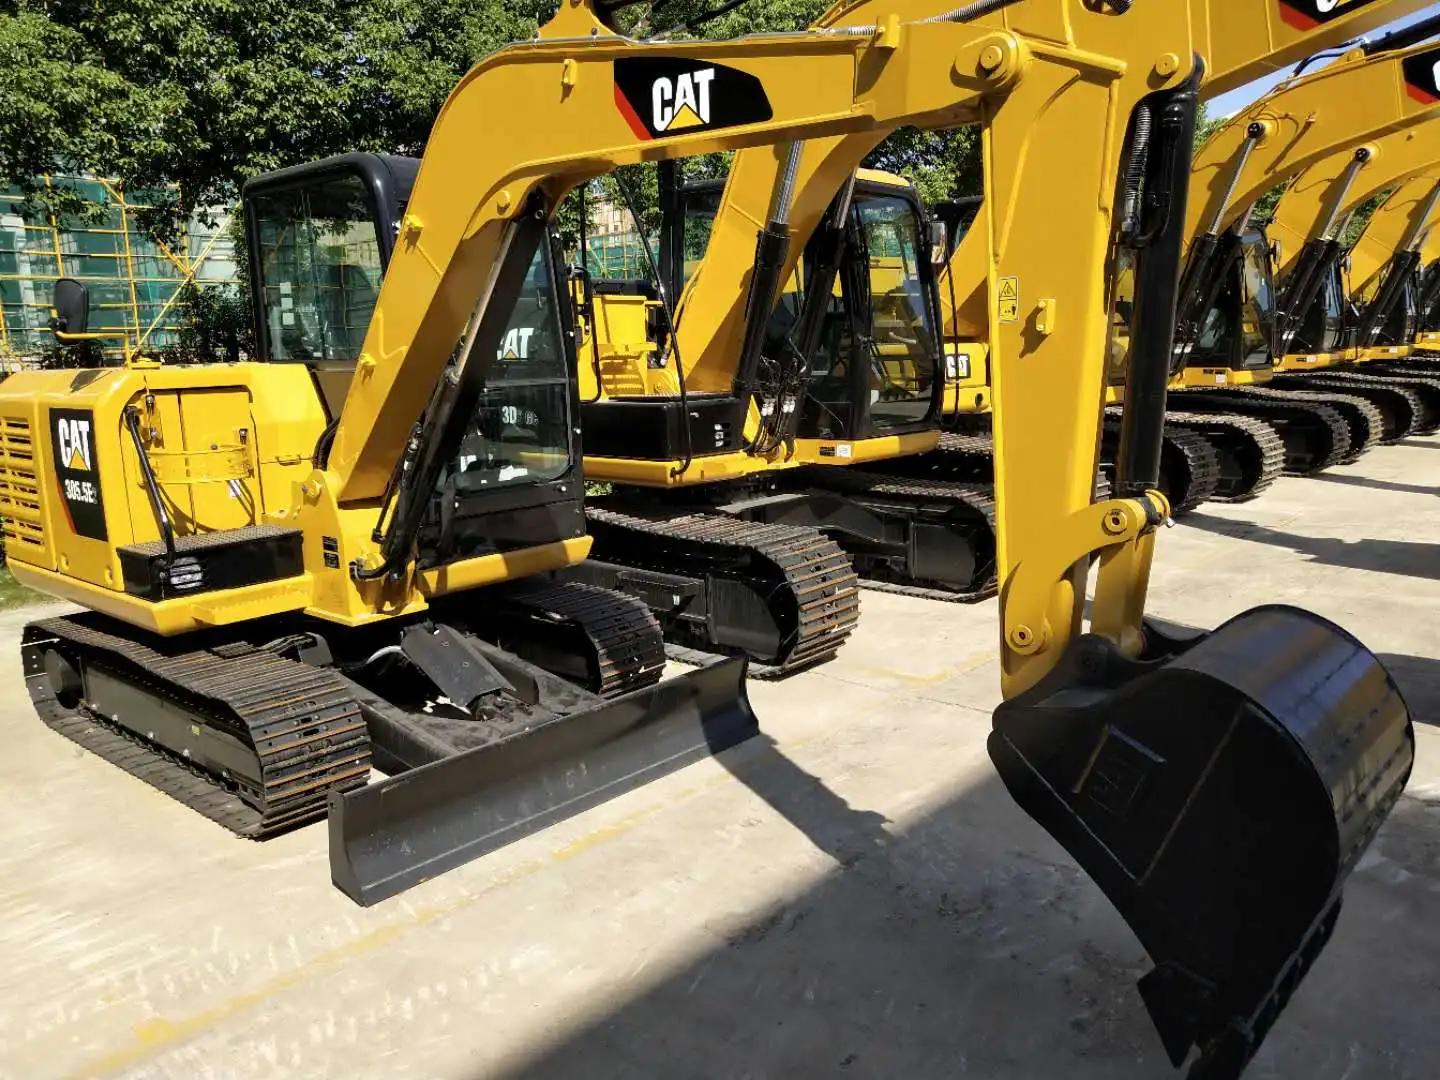 Low Price Used Cat 305 D Excavator Japan Komatsu Cheap For Sale In China Buy Used Cat 305dexcavator With Good Condition Cheap For Sale Second Hand 5ton Cat Excavator Used Cat Excavator Product On Alibaba Com